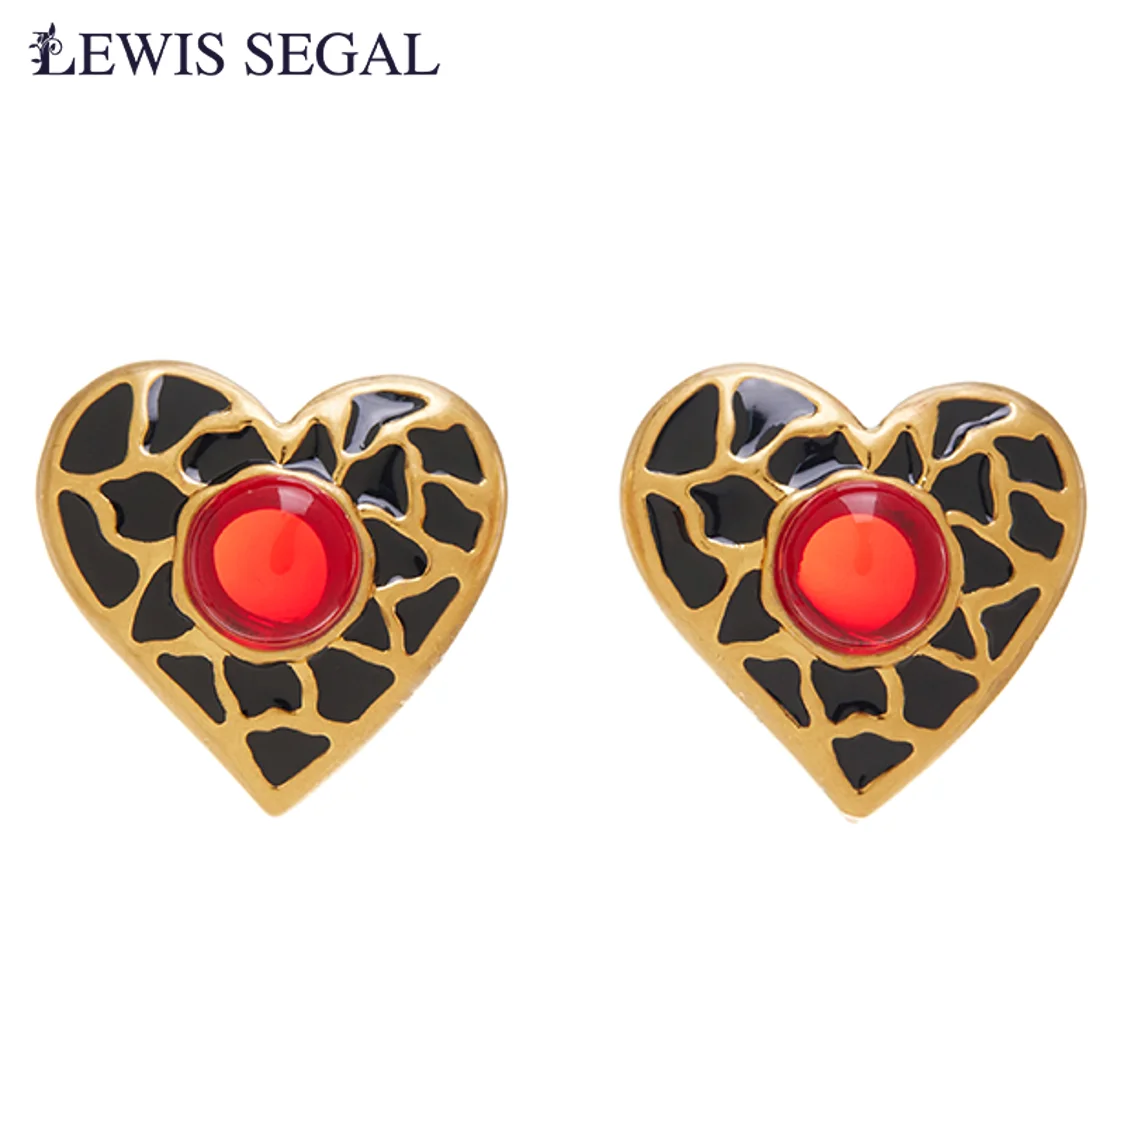 

LEWIS SEGAL Medieval Style Vintage 18k Jewelry for Women Independent Girl Red Glaze Heart Stud Earrings 18K Gold Plated